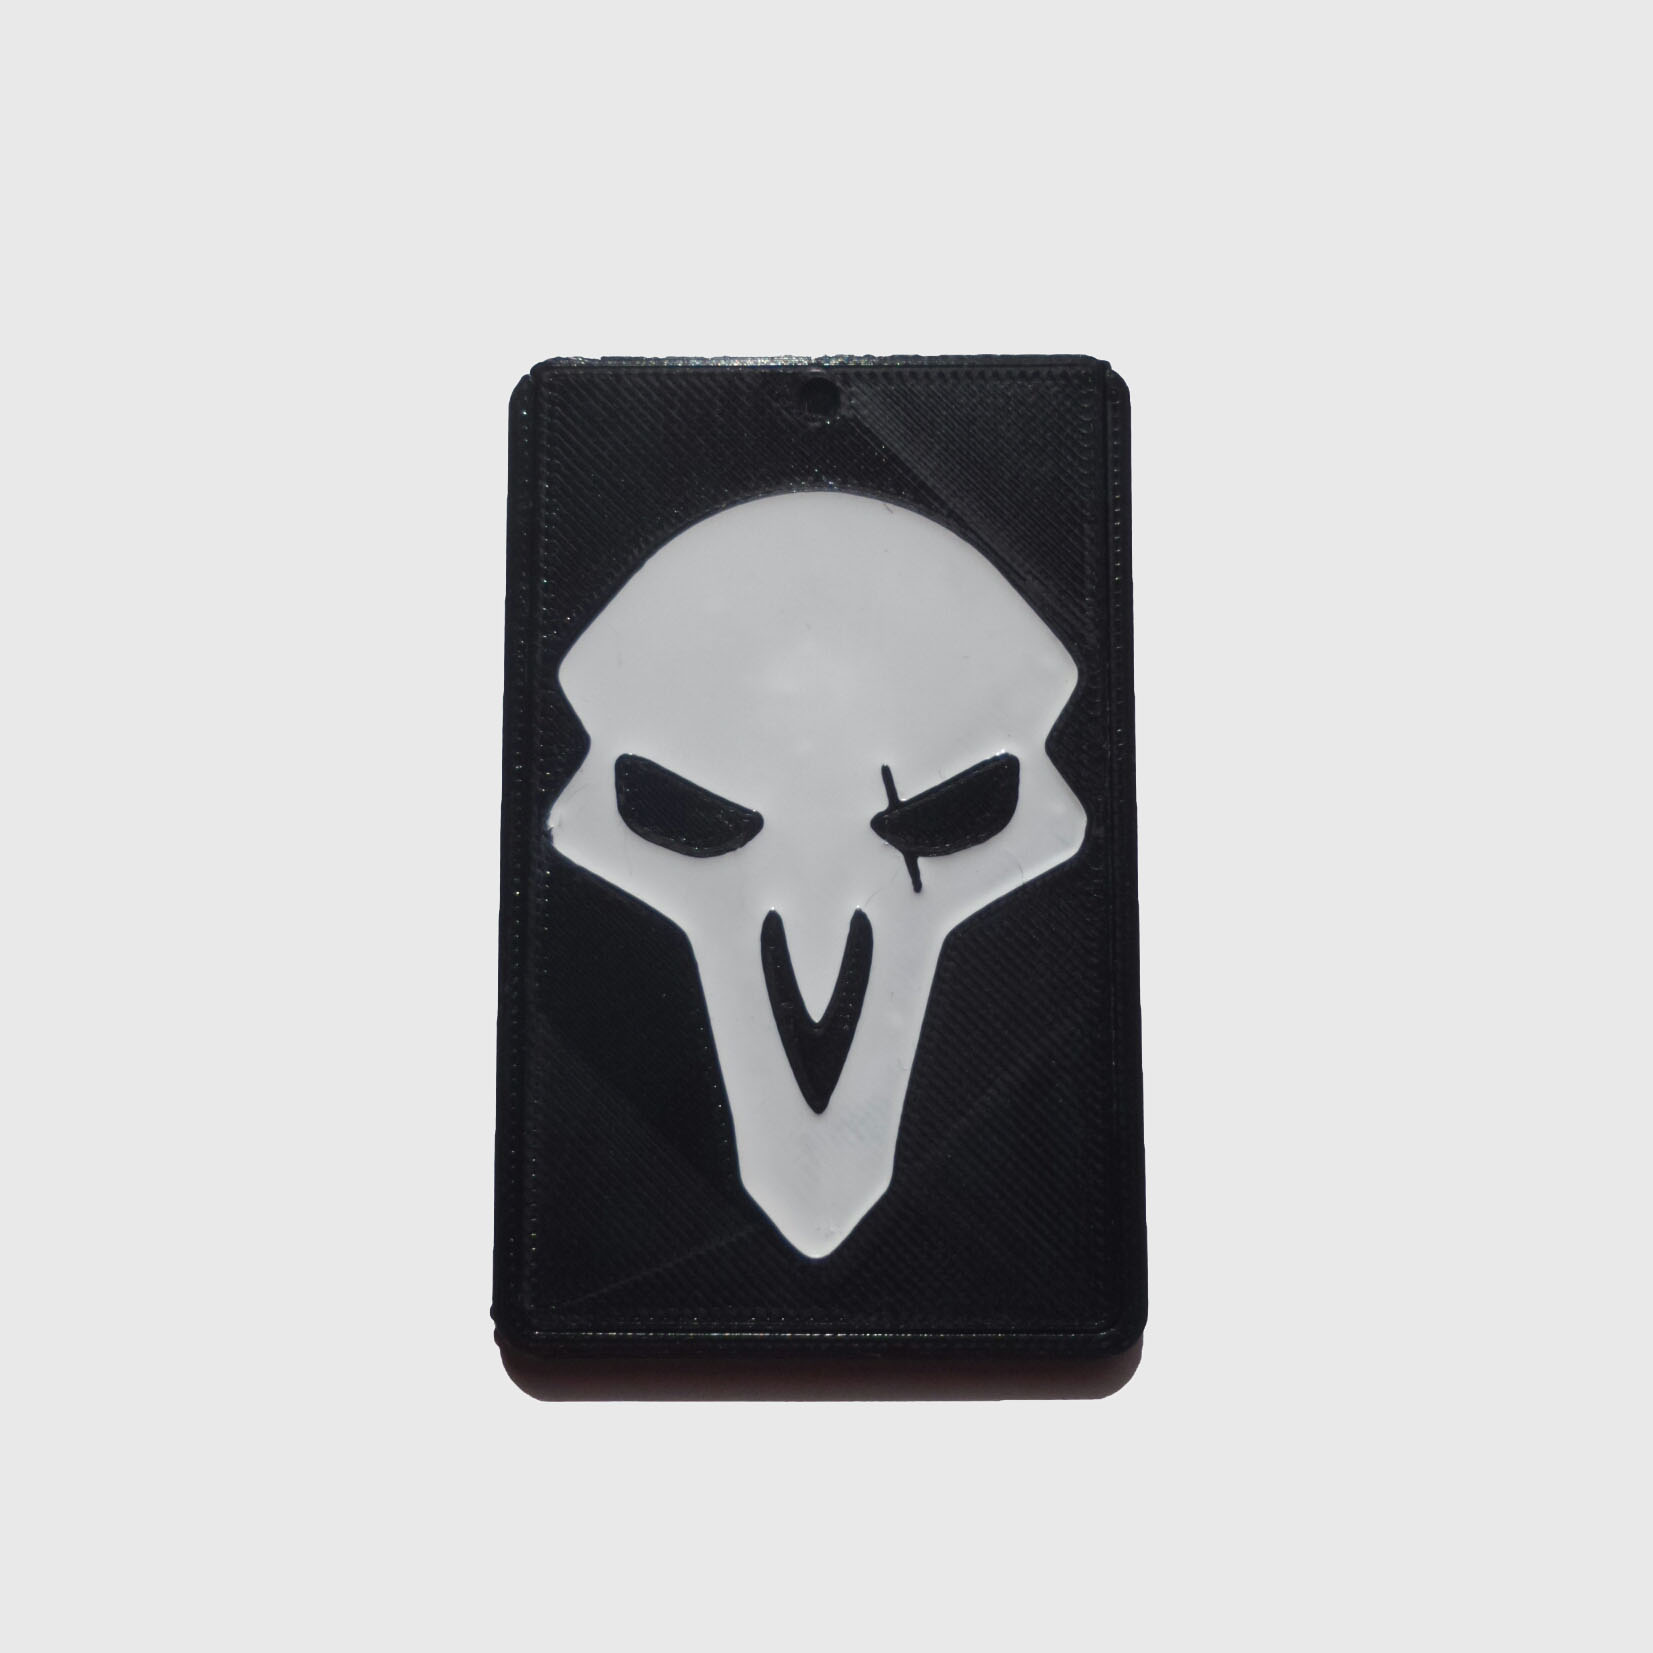 OVERWATCH - REAPER - ID card holder Credit Card Bus card case keyring